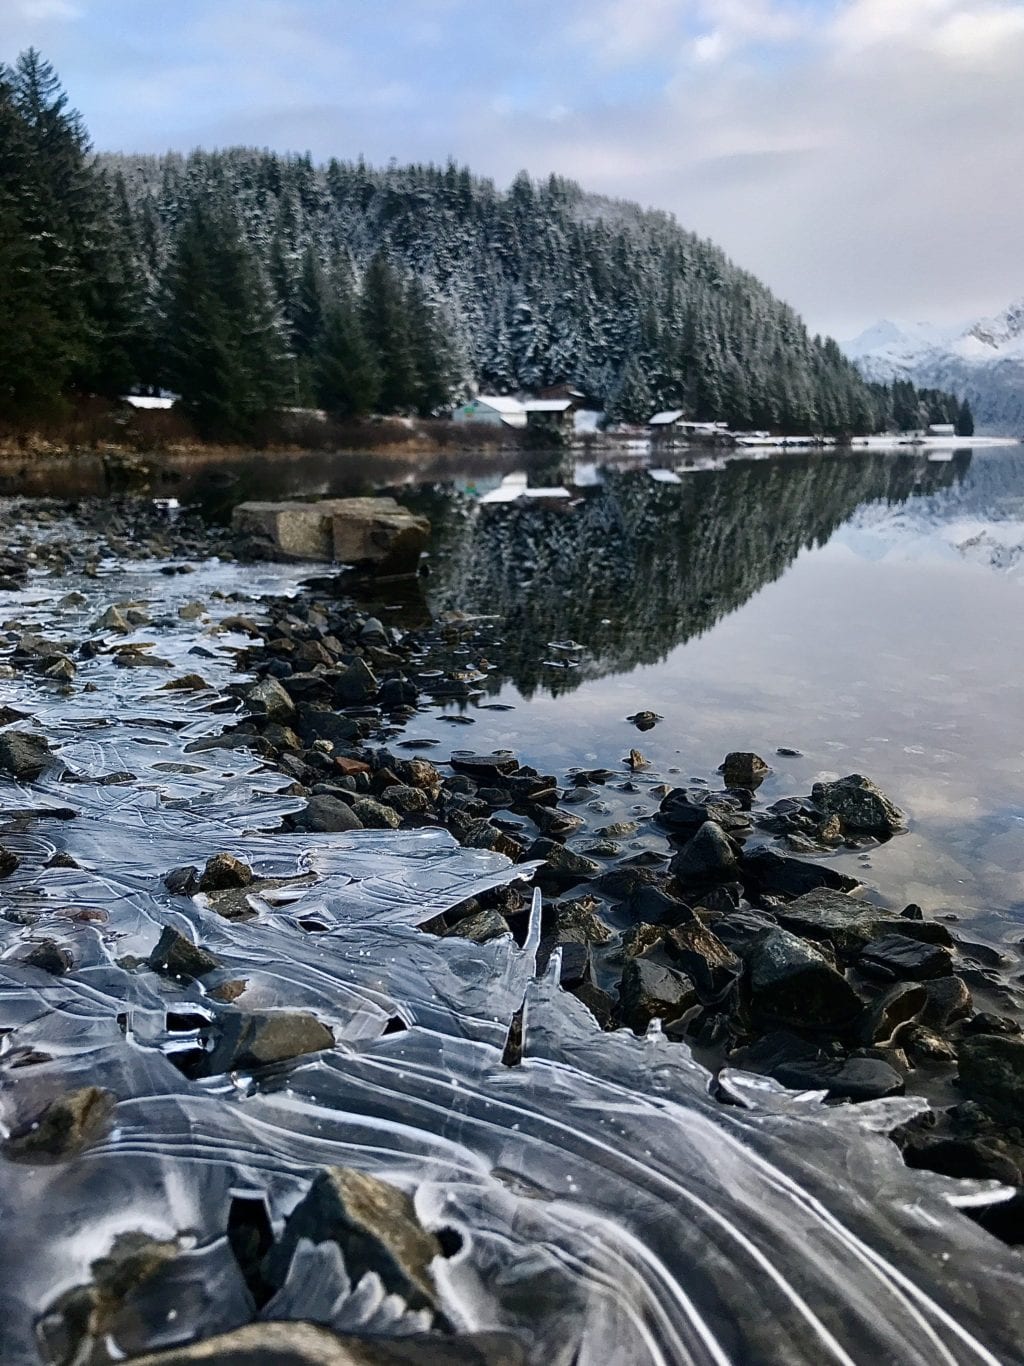 Monday morning on the spit enjoying the serenity of Lake Eyak. (Nov. 25, 2019) Photo by Charles Beyer/for The Cordova Times